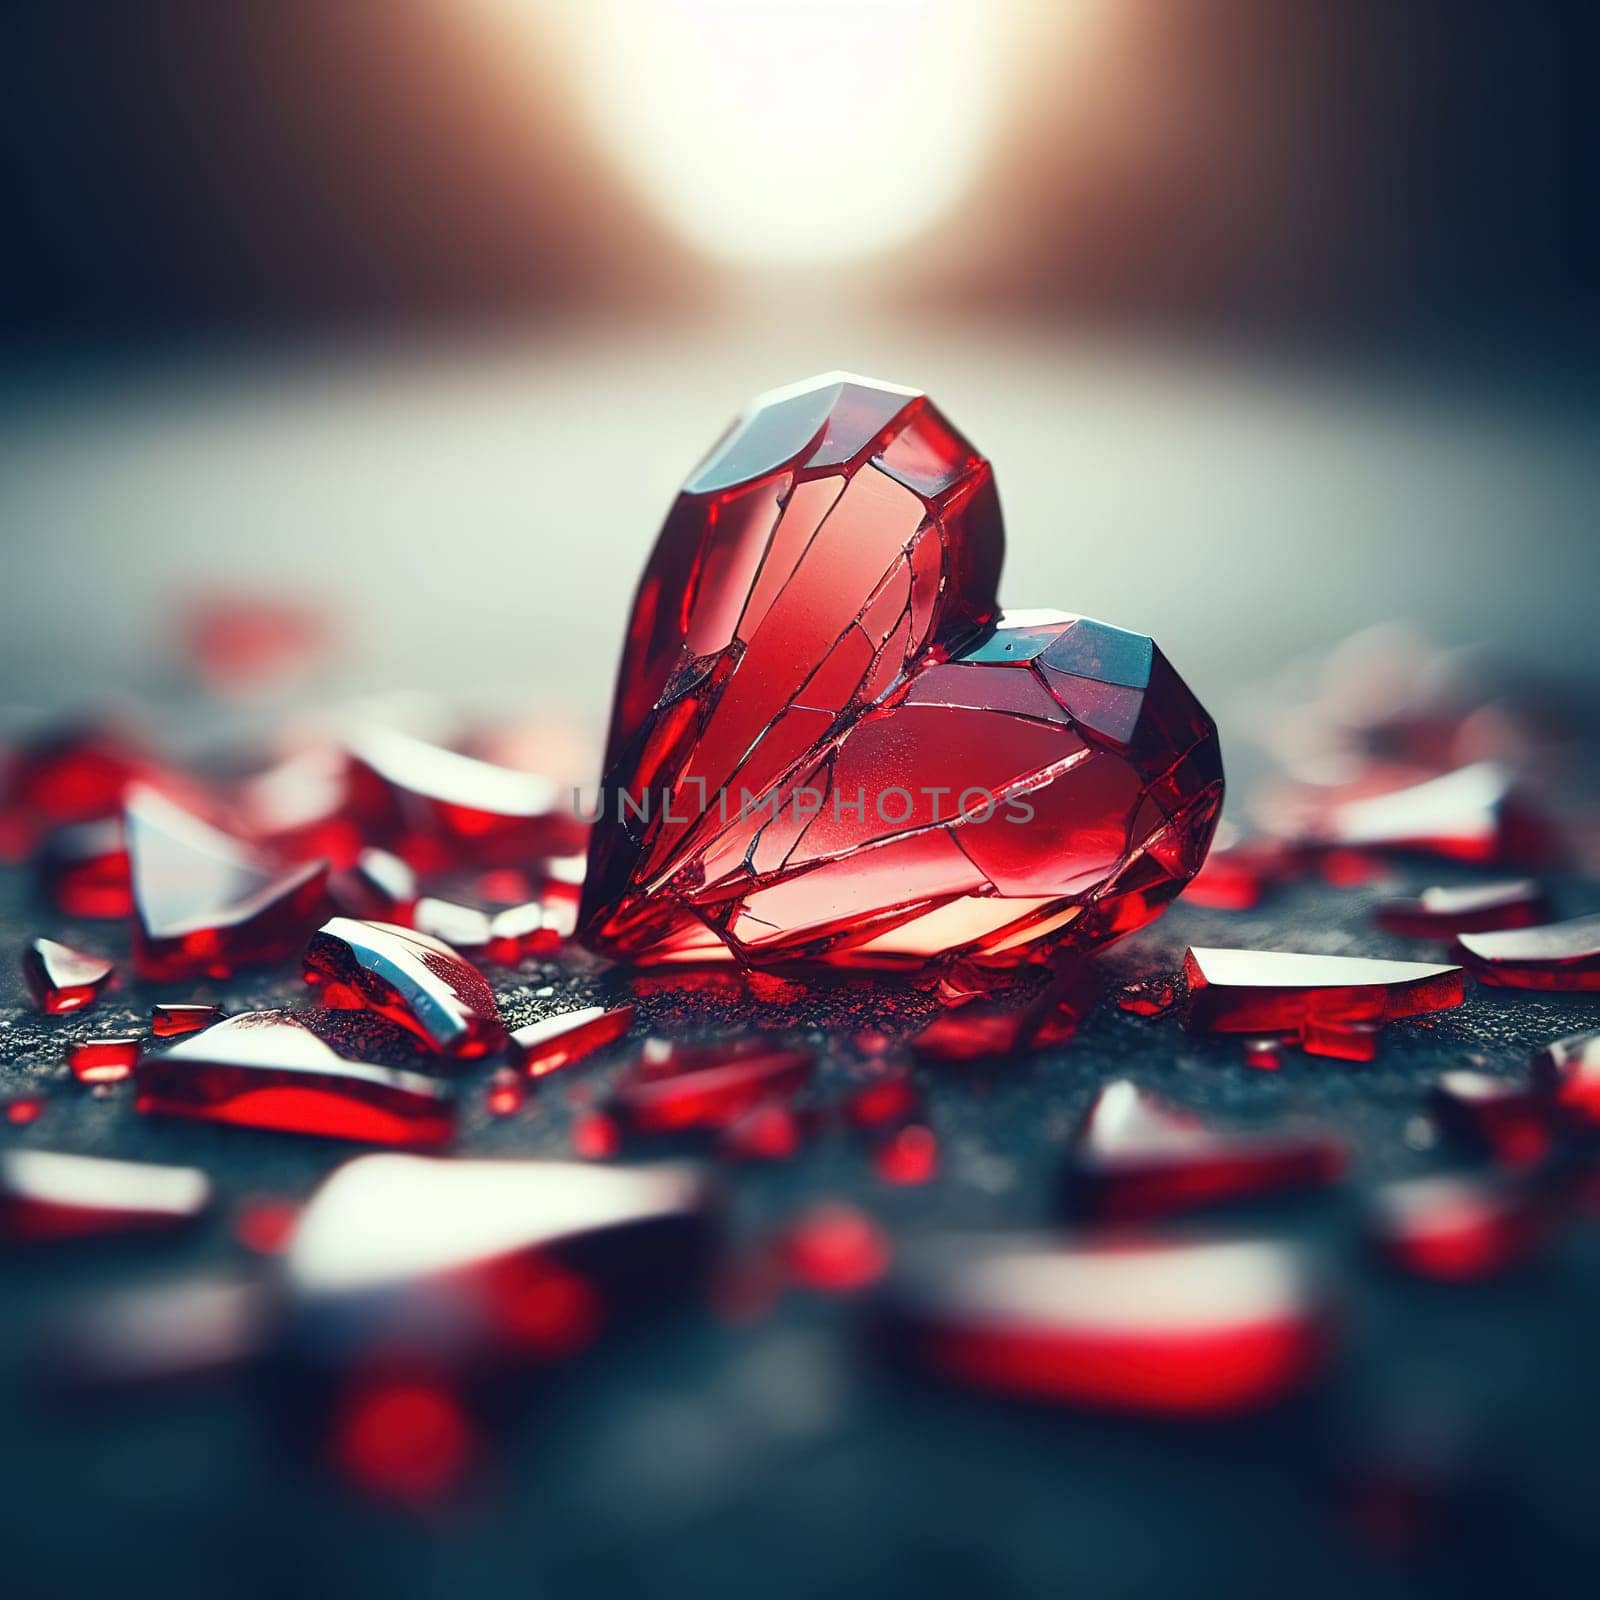 Glass heart shattered by gordiza